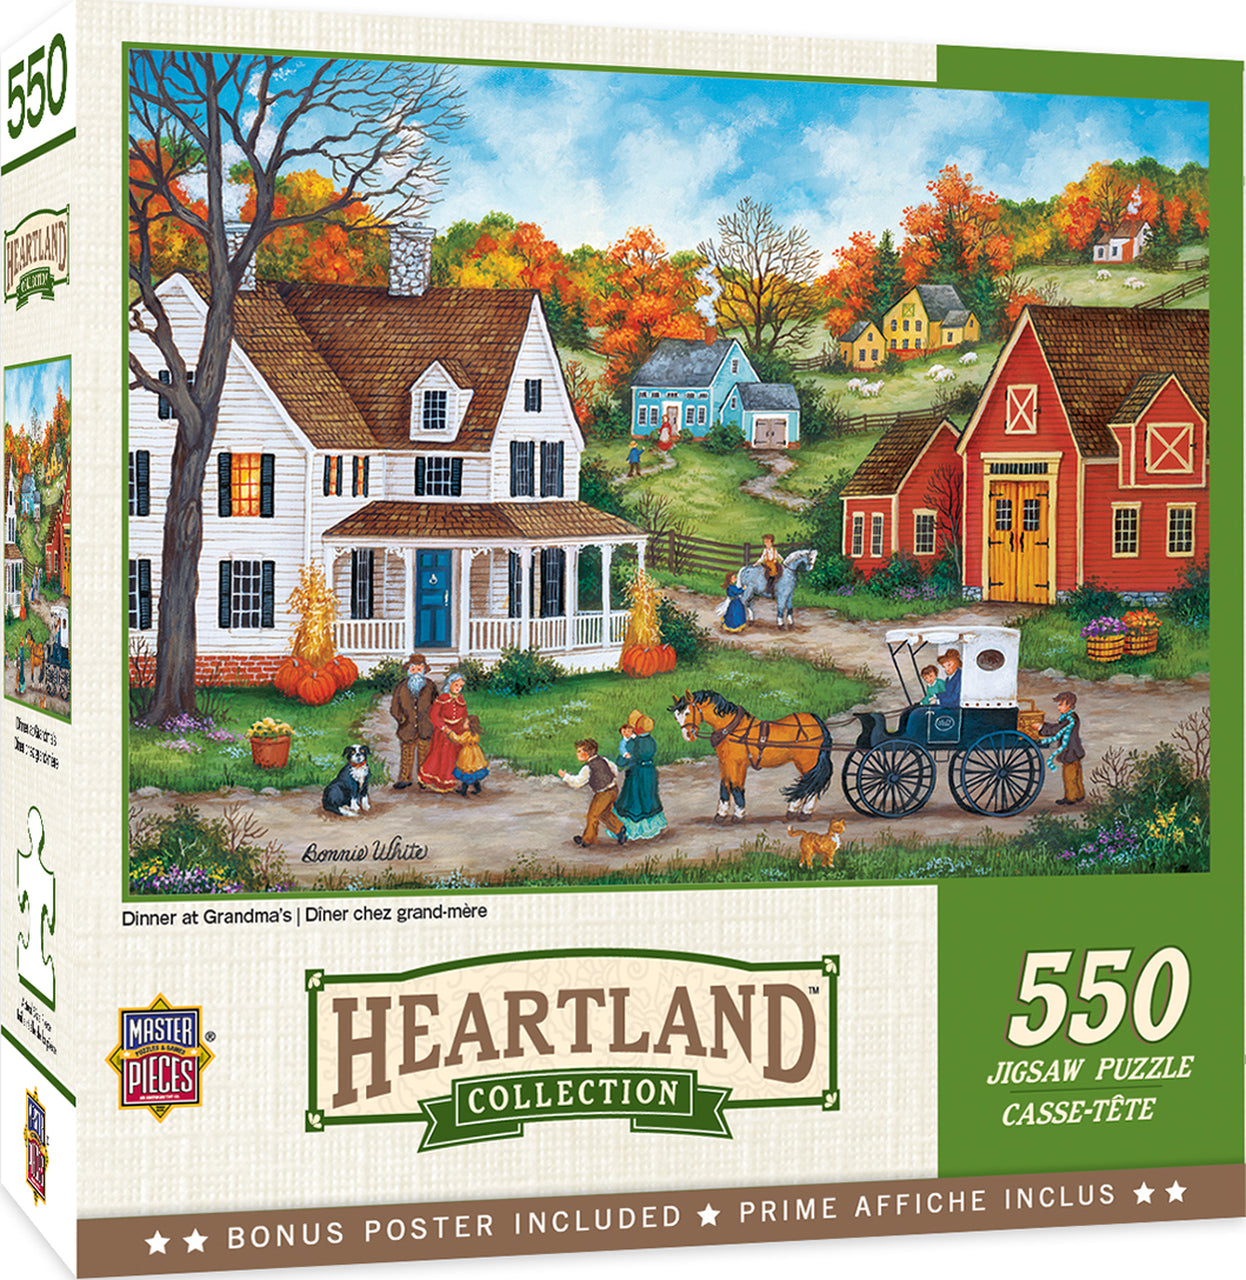 Heartland Collection - Dinner at Grandmas 550 Piece Jigsaw Puzzle by Masterpieces